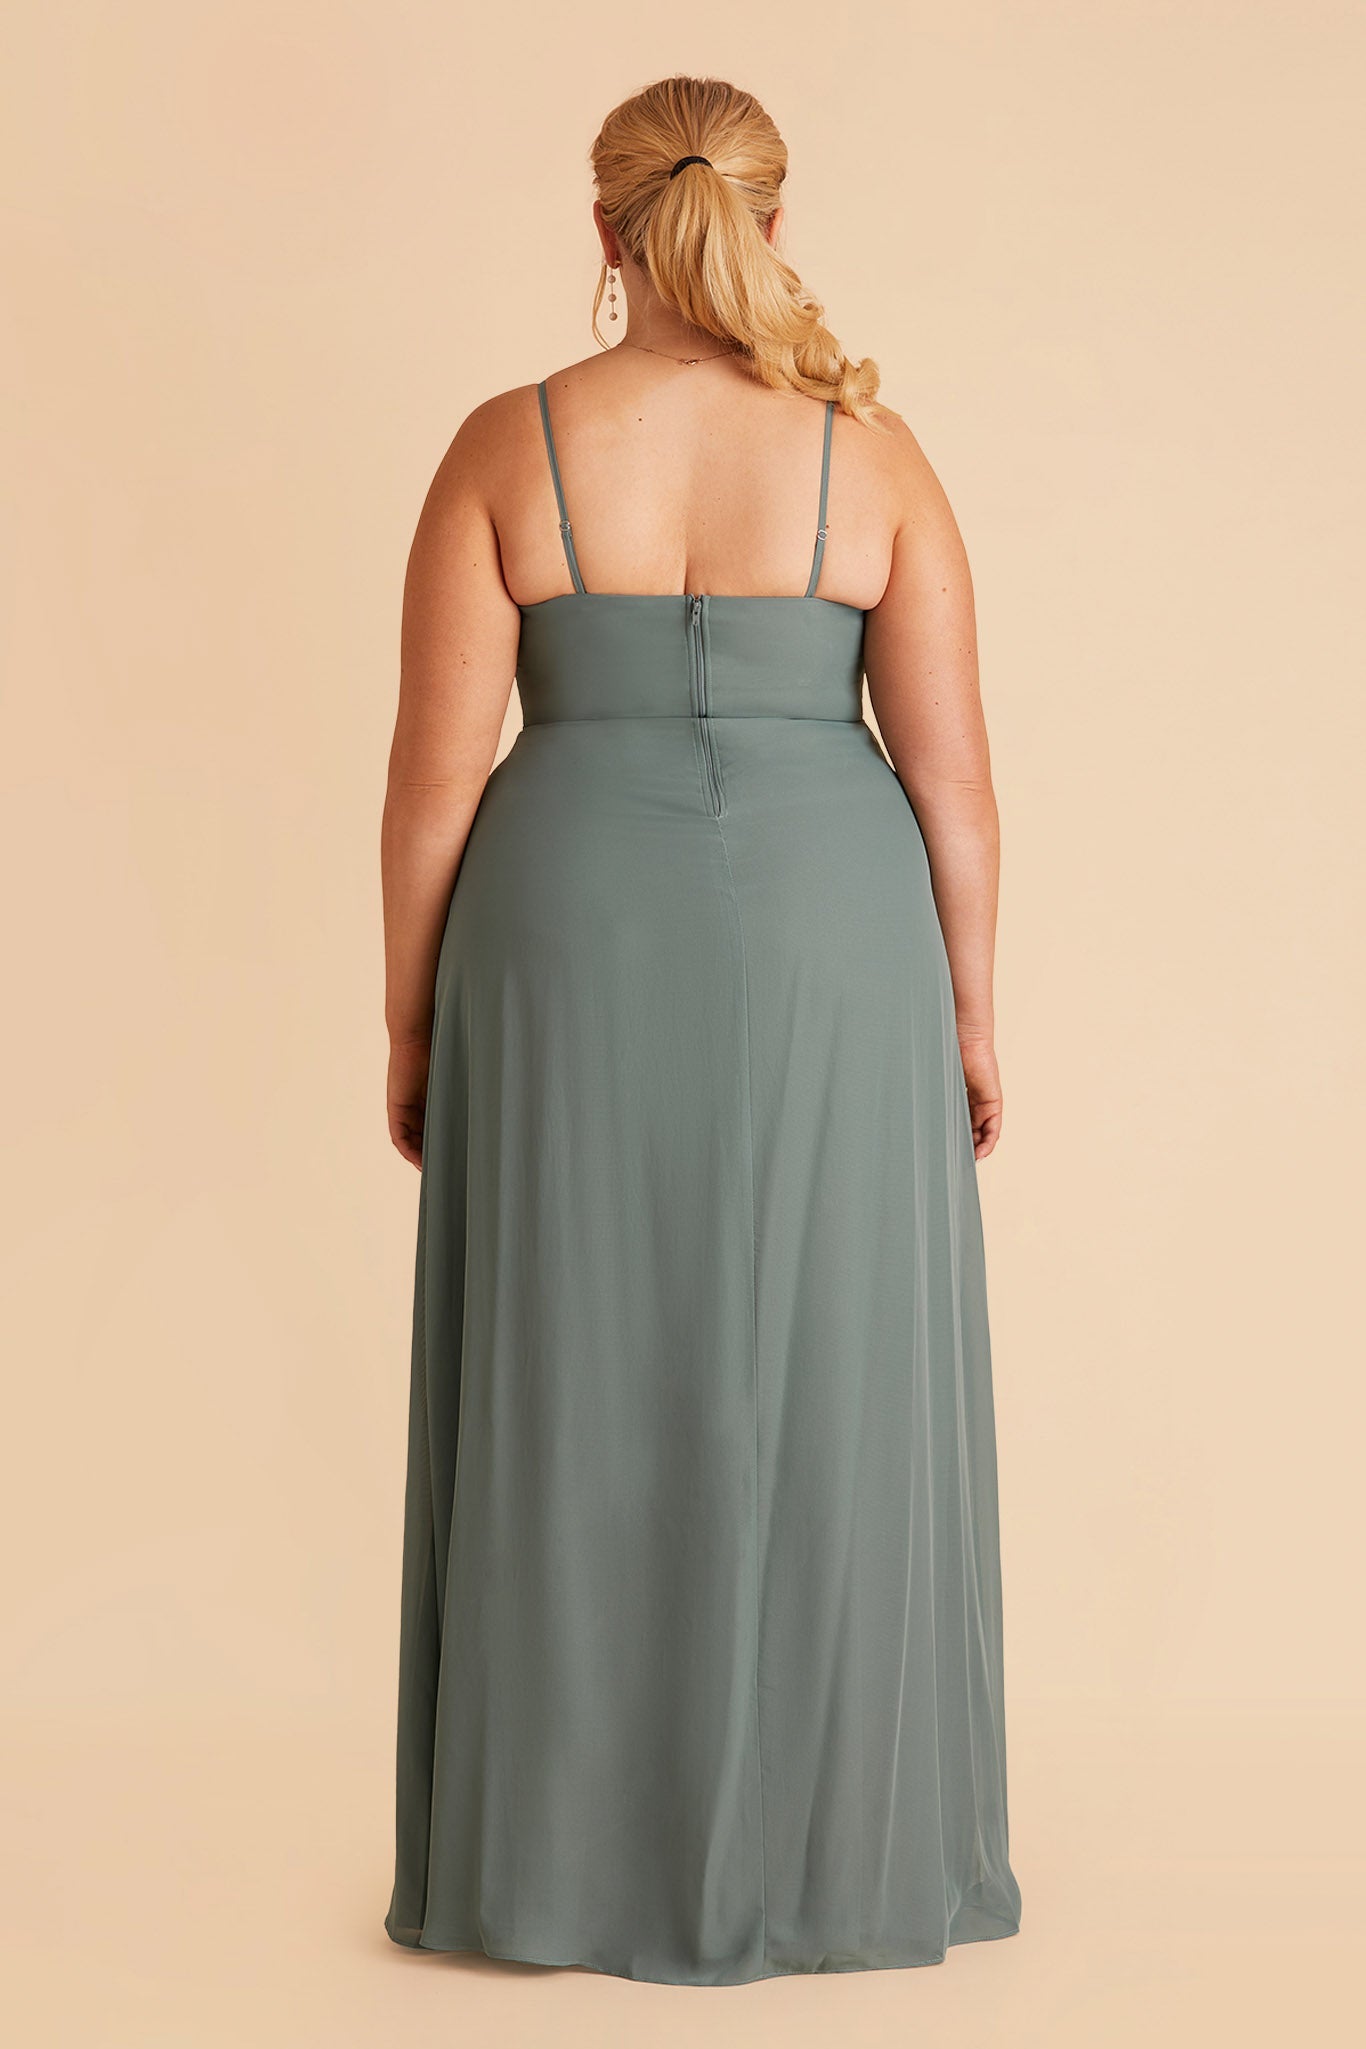 Chris plus size bridesmaid dress with slit in sea glass chiffon by Birdy Grey, Back view